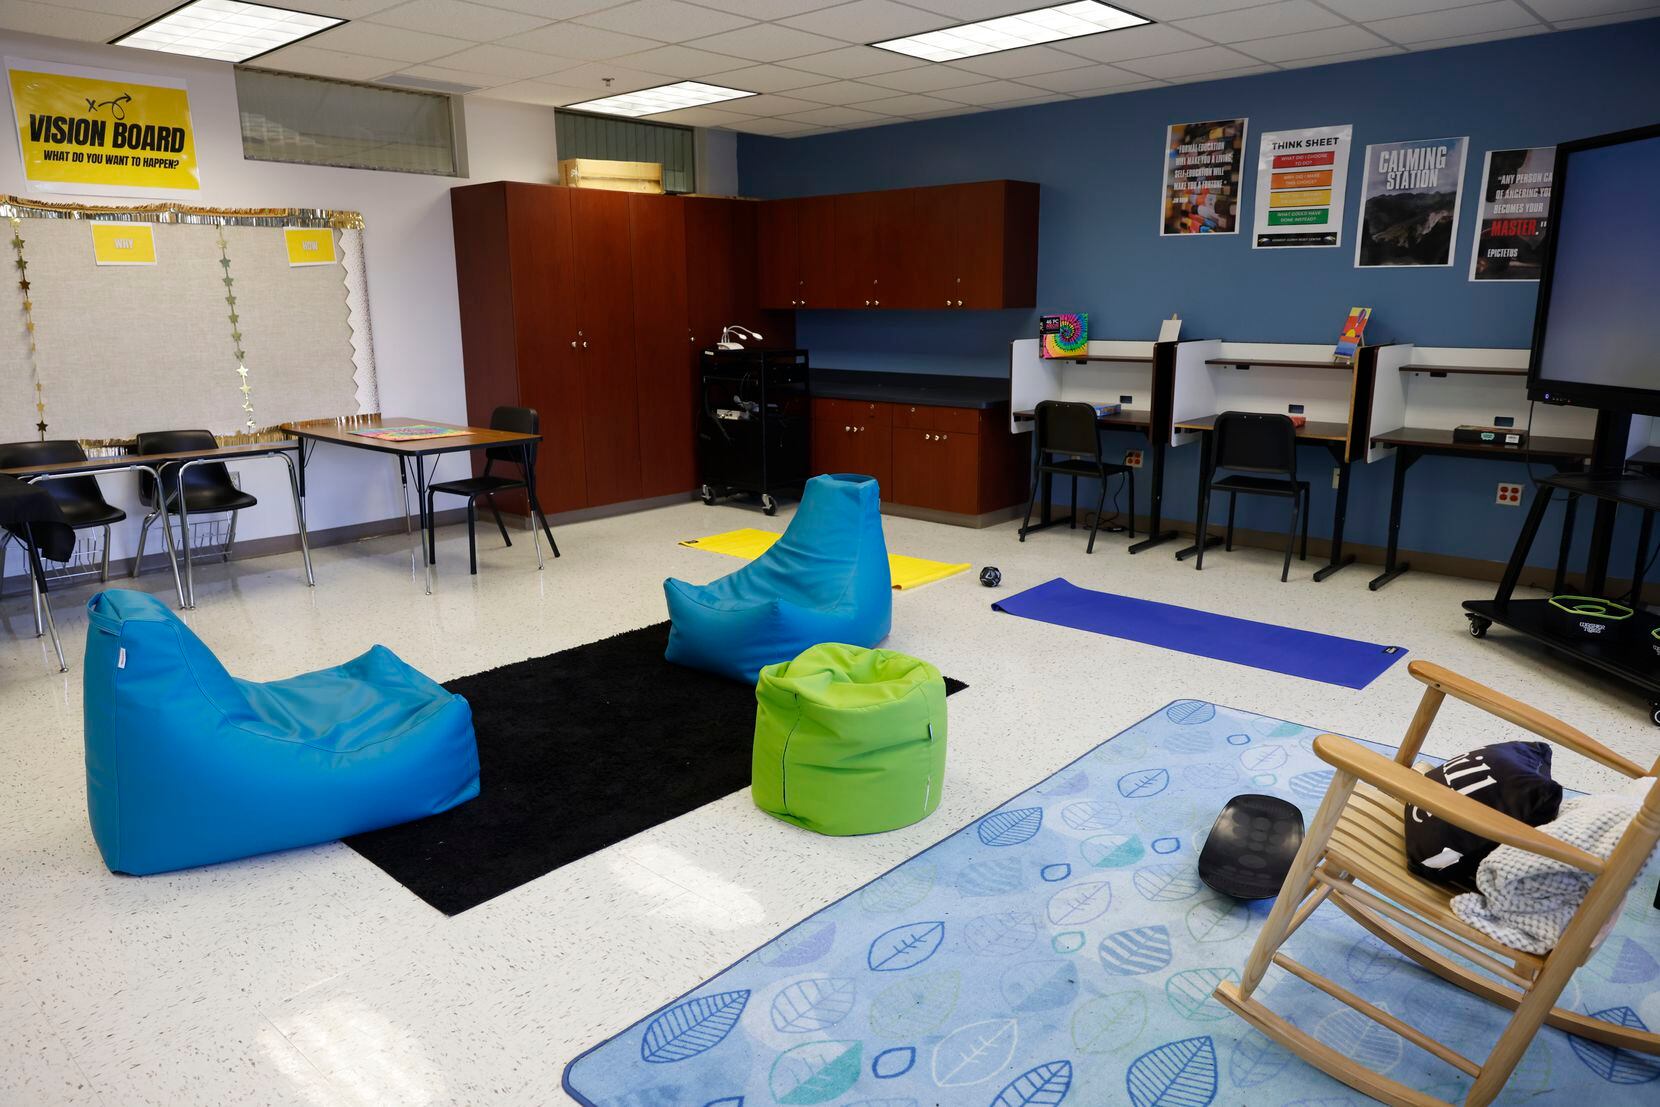 The reset center where students can talk about their emotions and conflicts they are facing,...